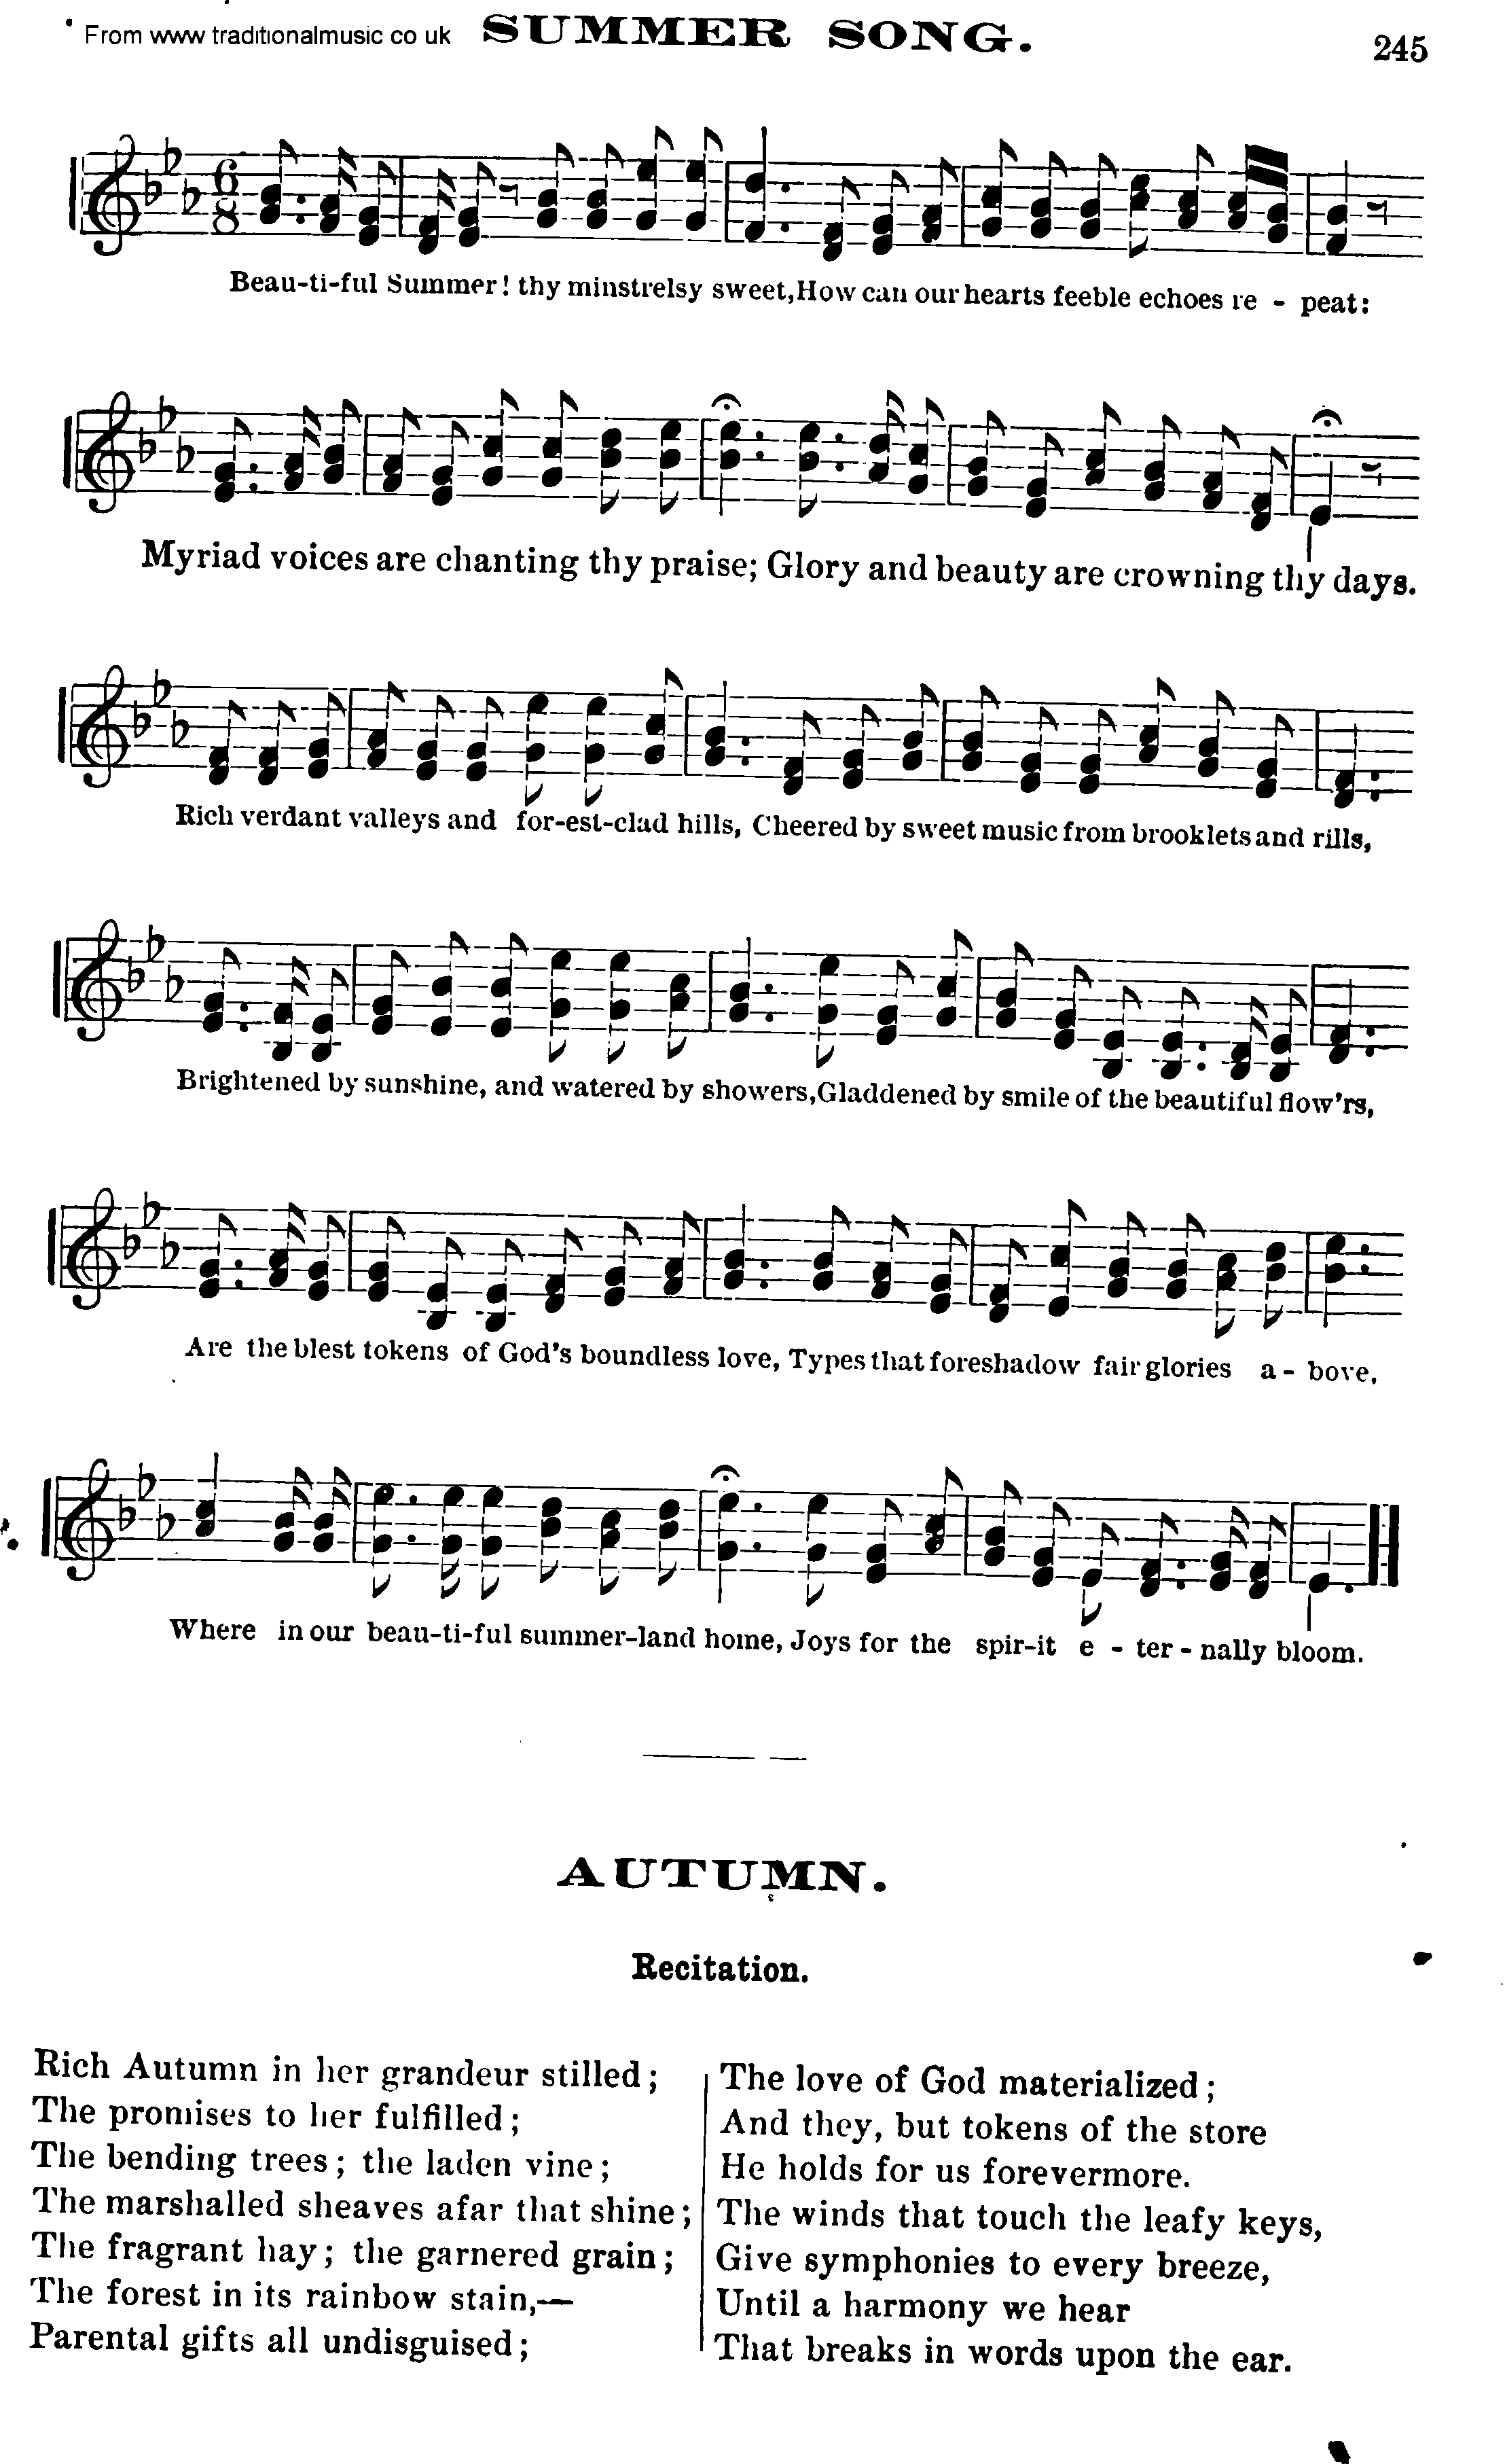 Shaker Music collection, Hymn: Summer Song--Autumn, sheetmusic and PDF